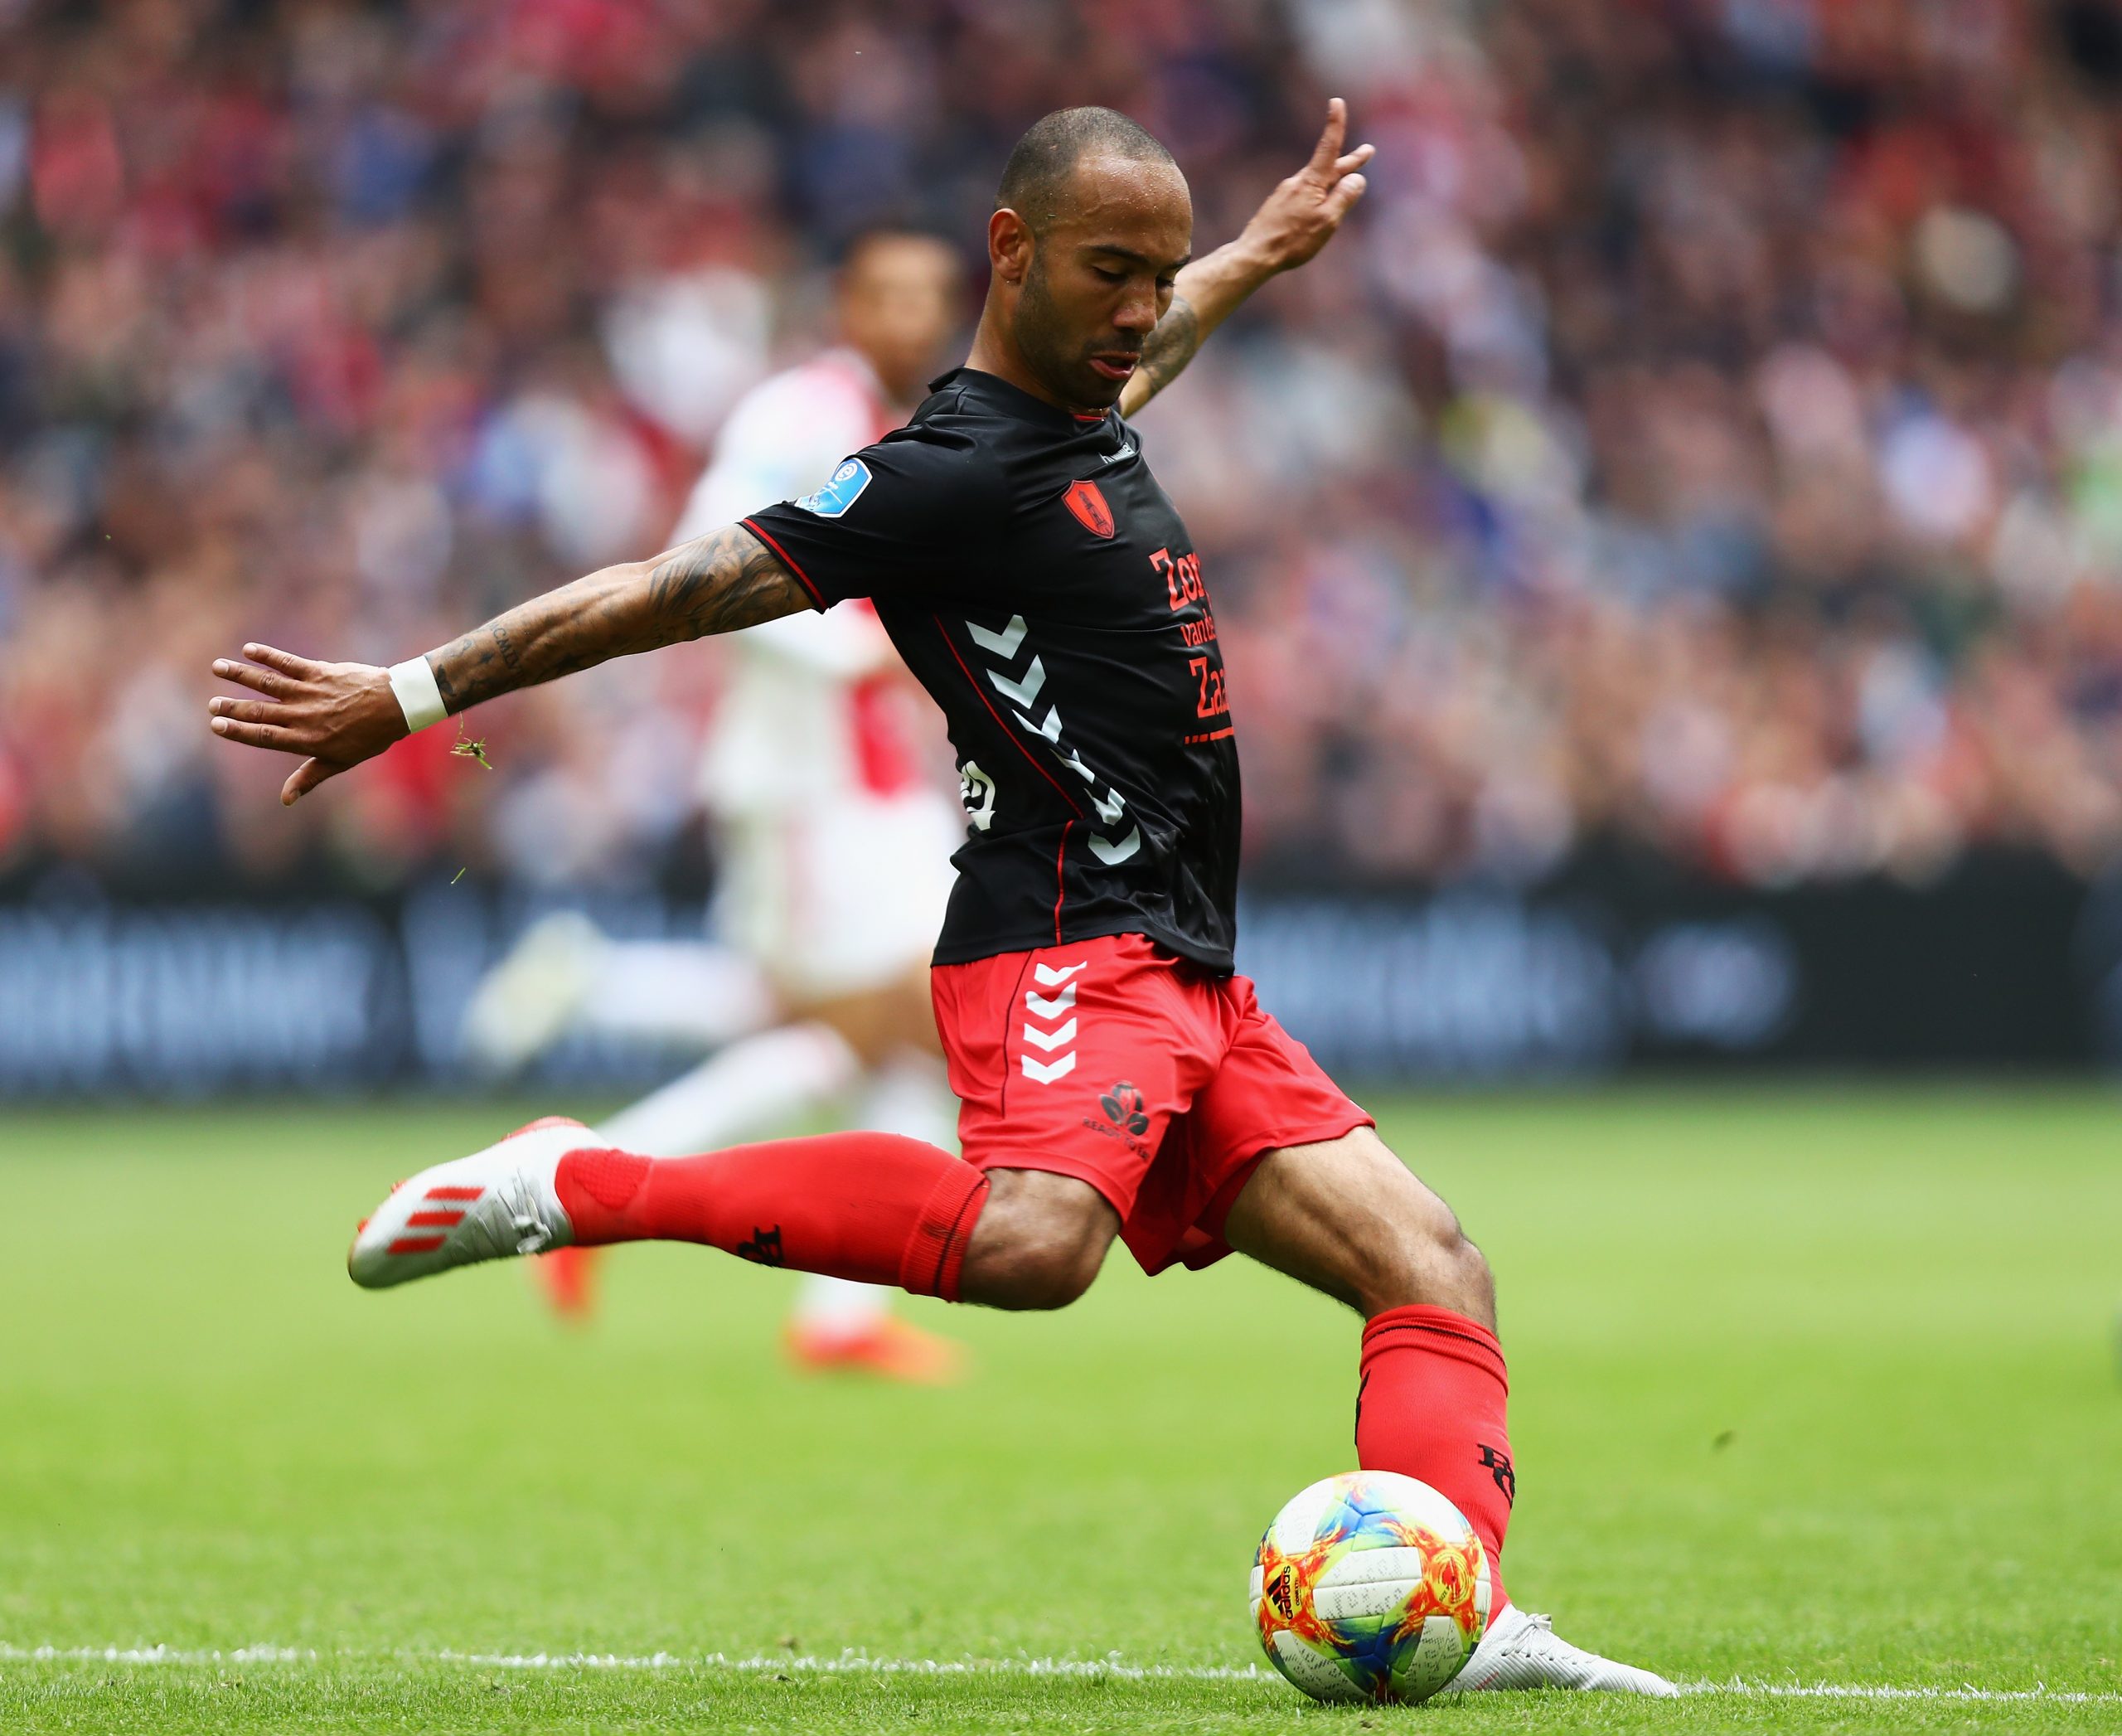 Sean Klaiber is one of the key players for Utrecht (Getty Images)